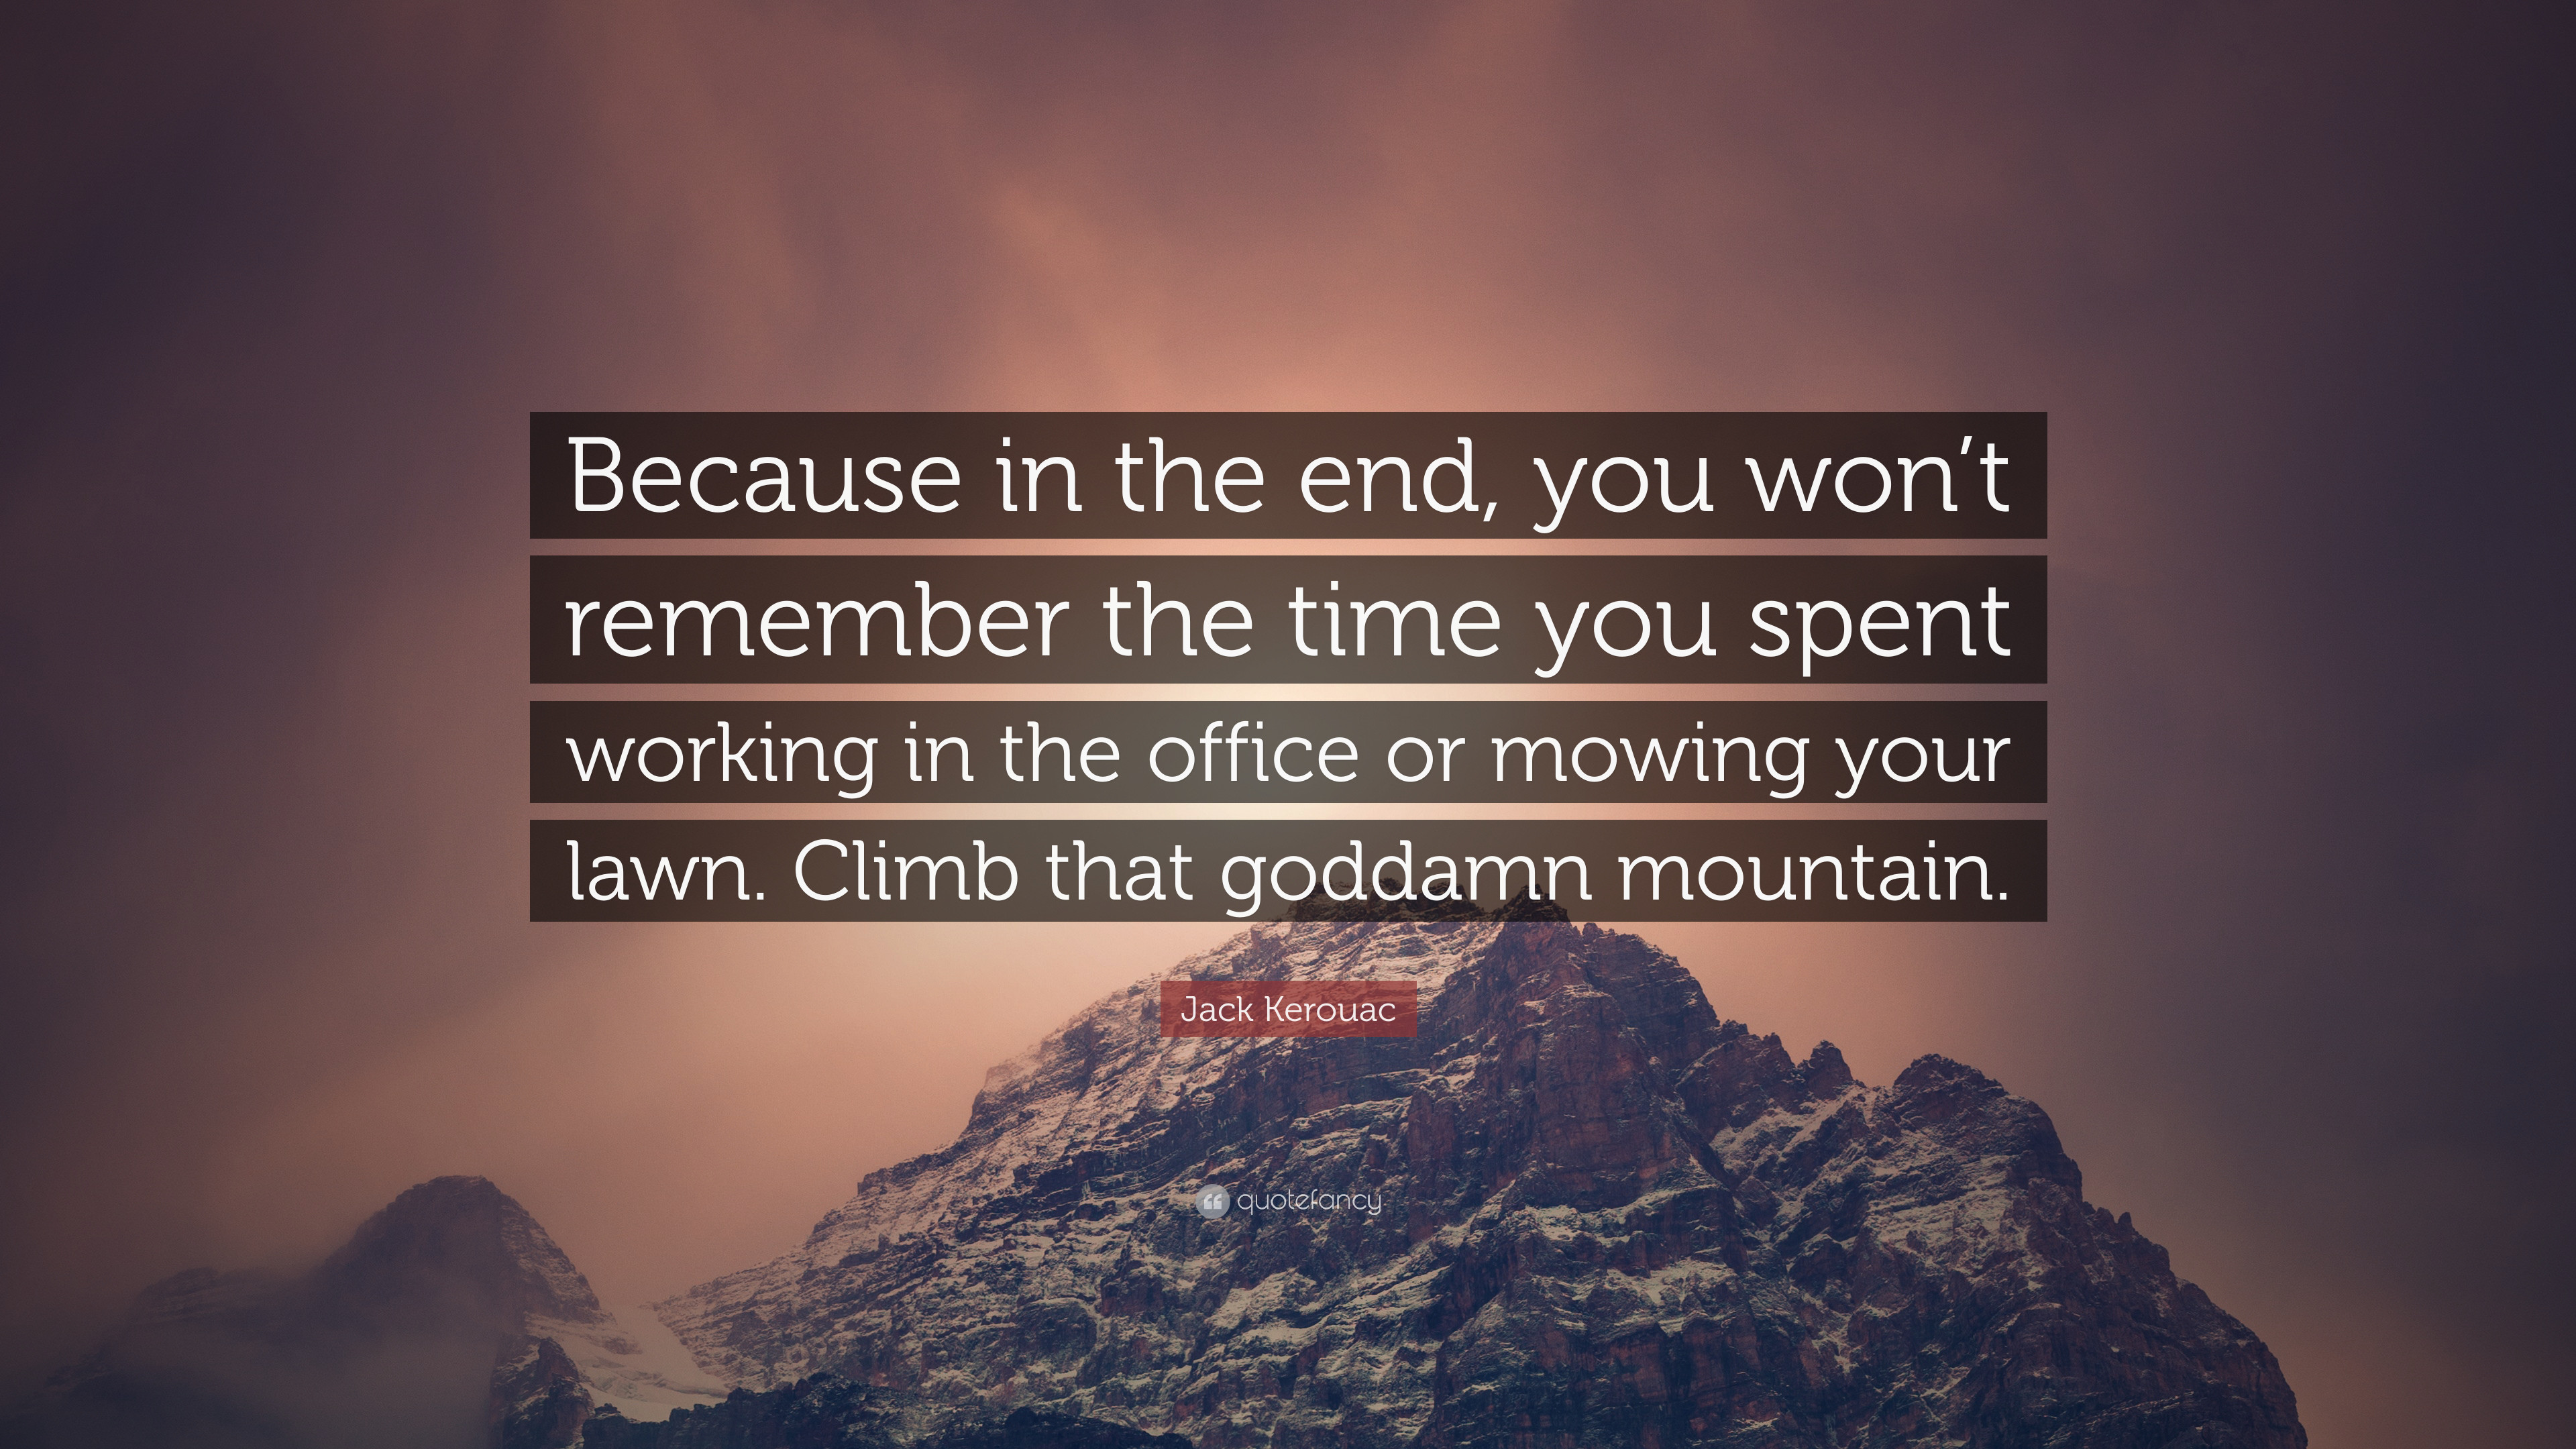 3840x2160 Jack Kerouac Quote: “Because in the end, you won't remember the